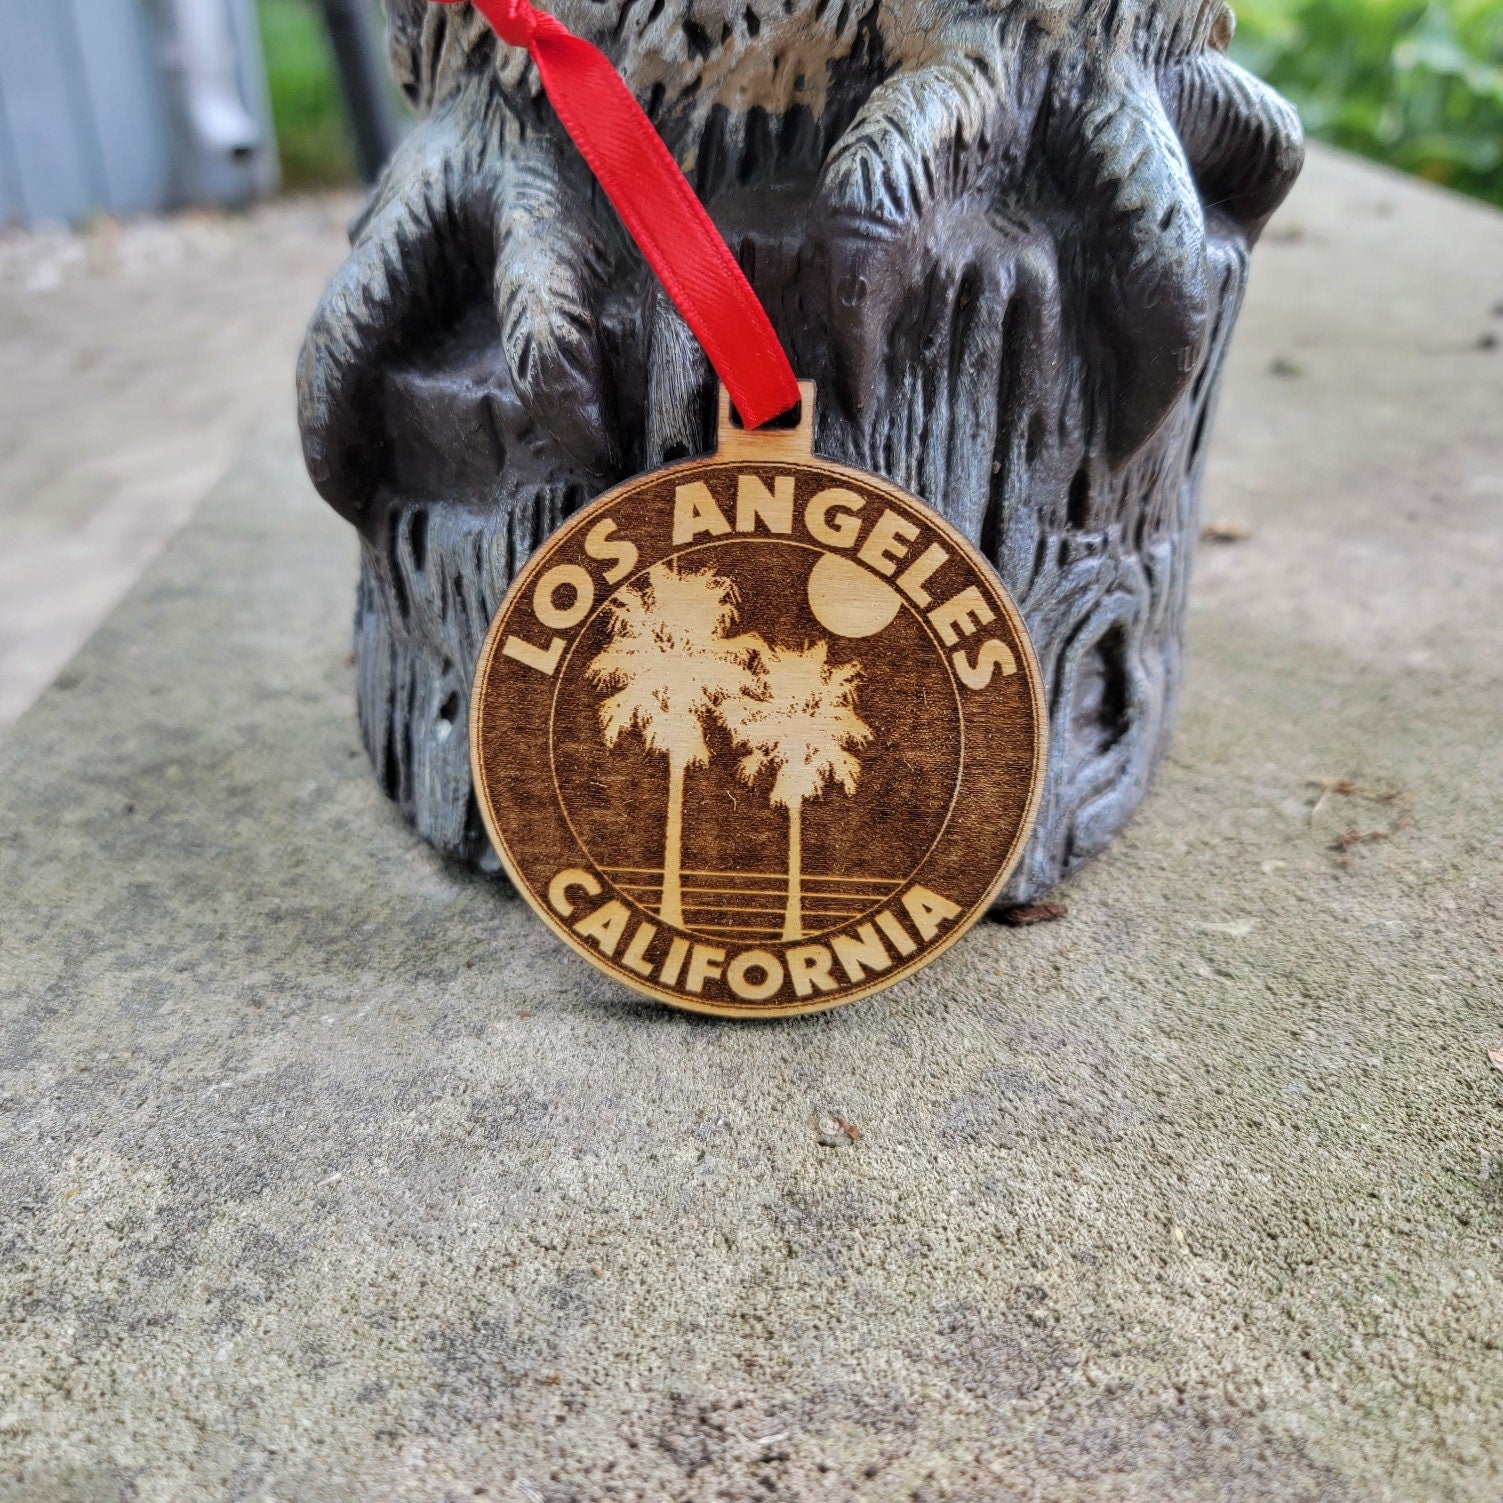 Los Angeles Ornament California Christmas Beach American Wood Engraved 3.1" CA Surfing Gift